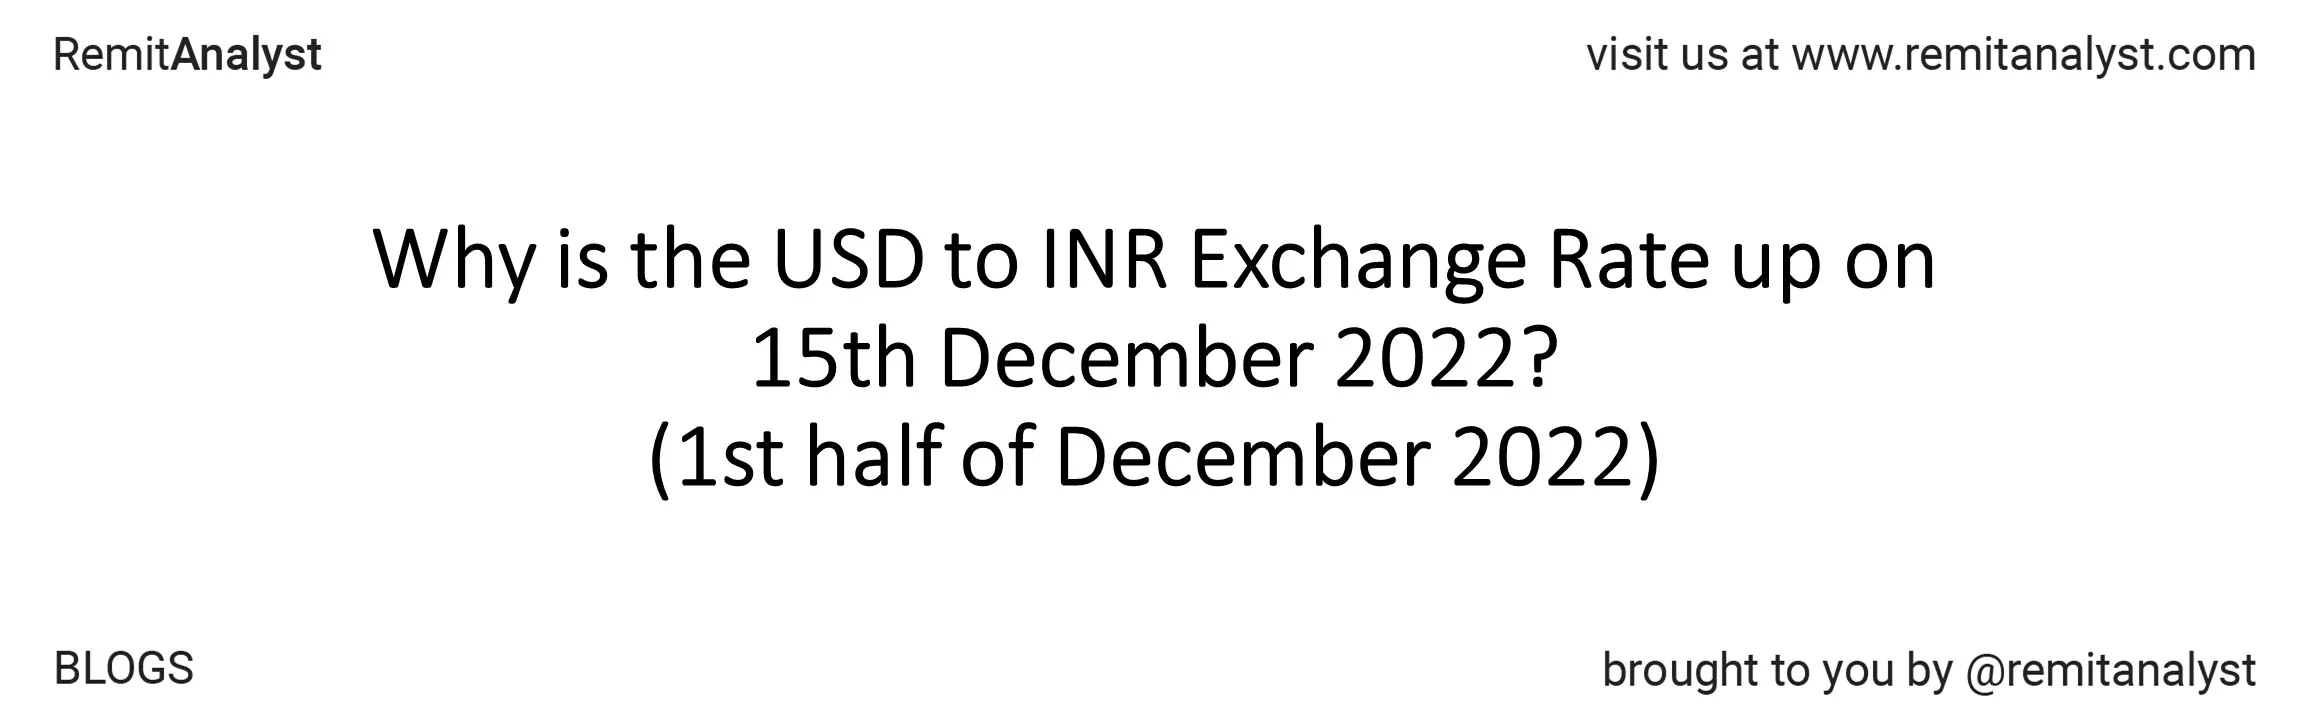 usd-to-inr-exchange-rate-1-dec-2022-to-15-dec-2022-title